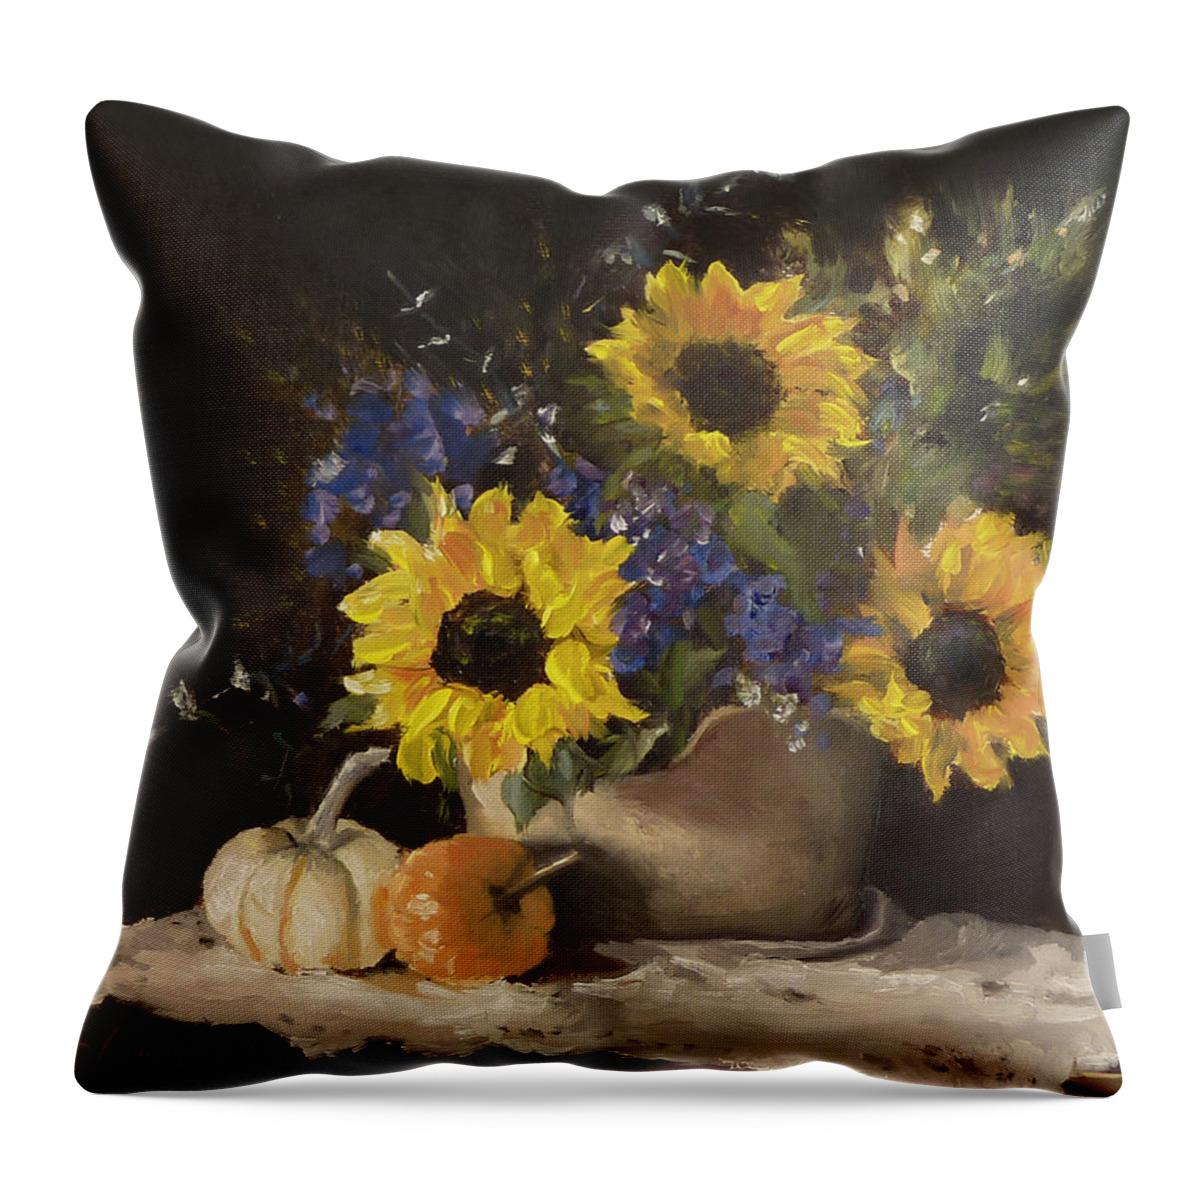 Sunflowers Throw Pillow featuring the painting Autumn Still by Lori Ippolito